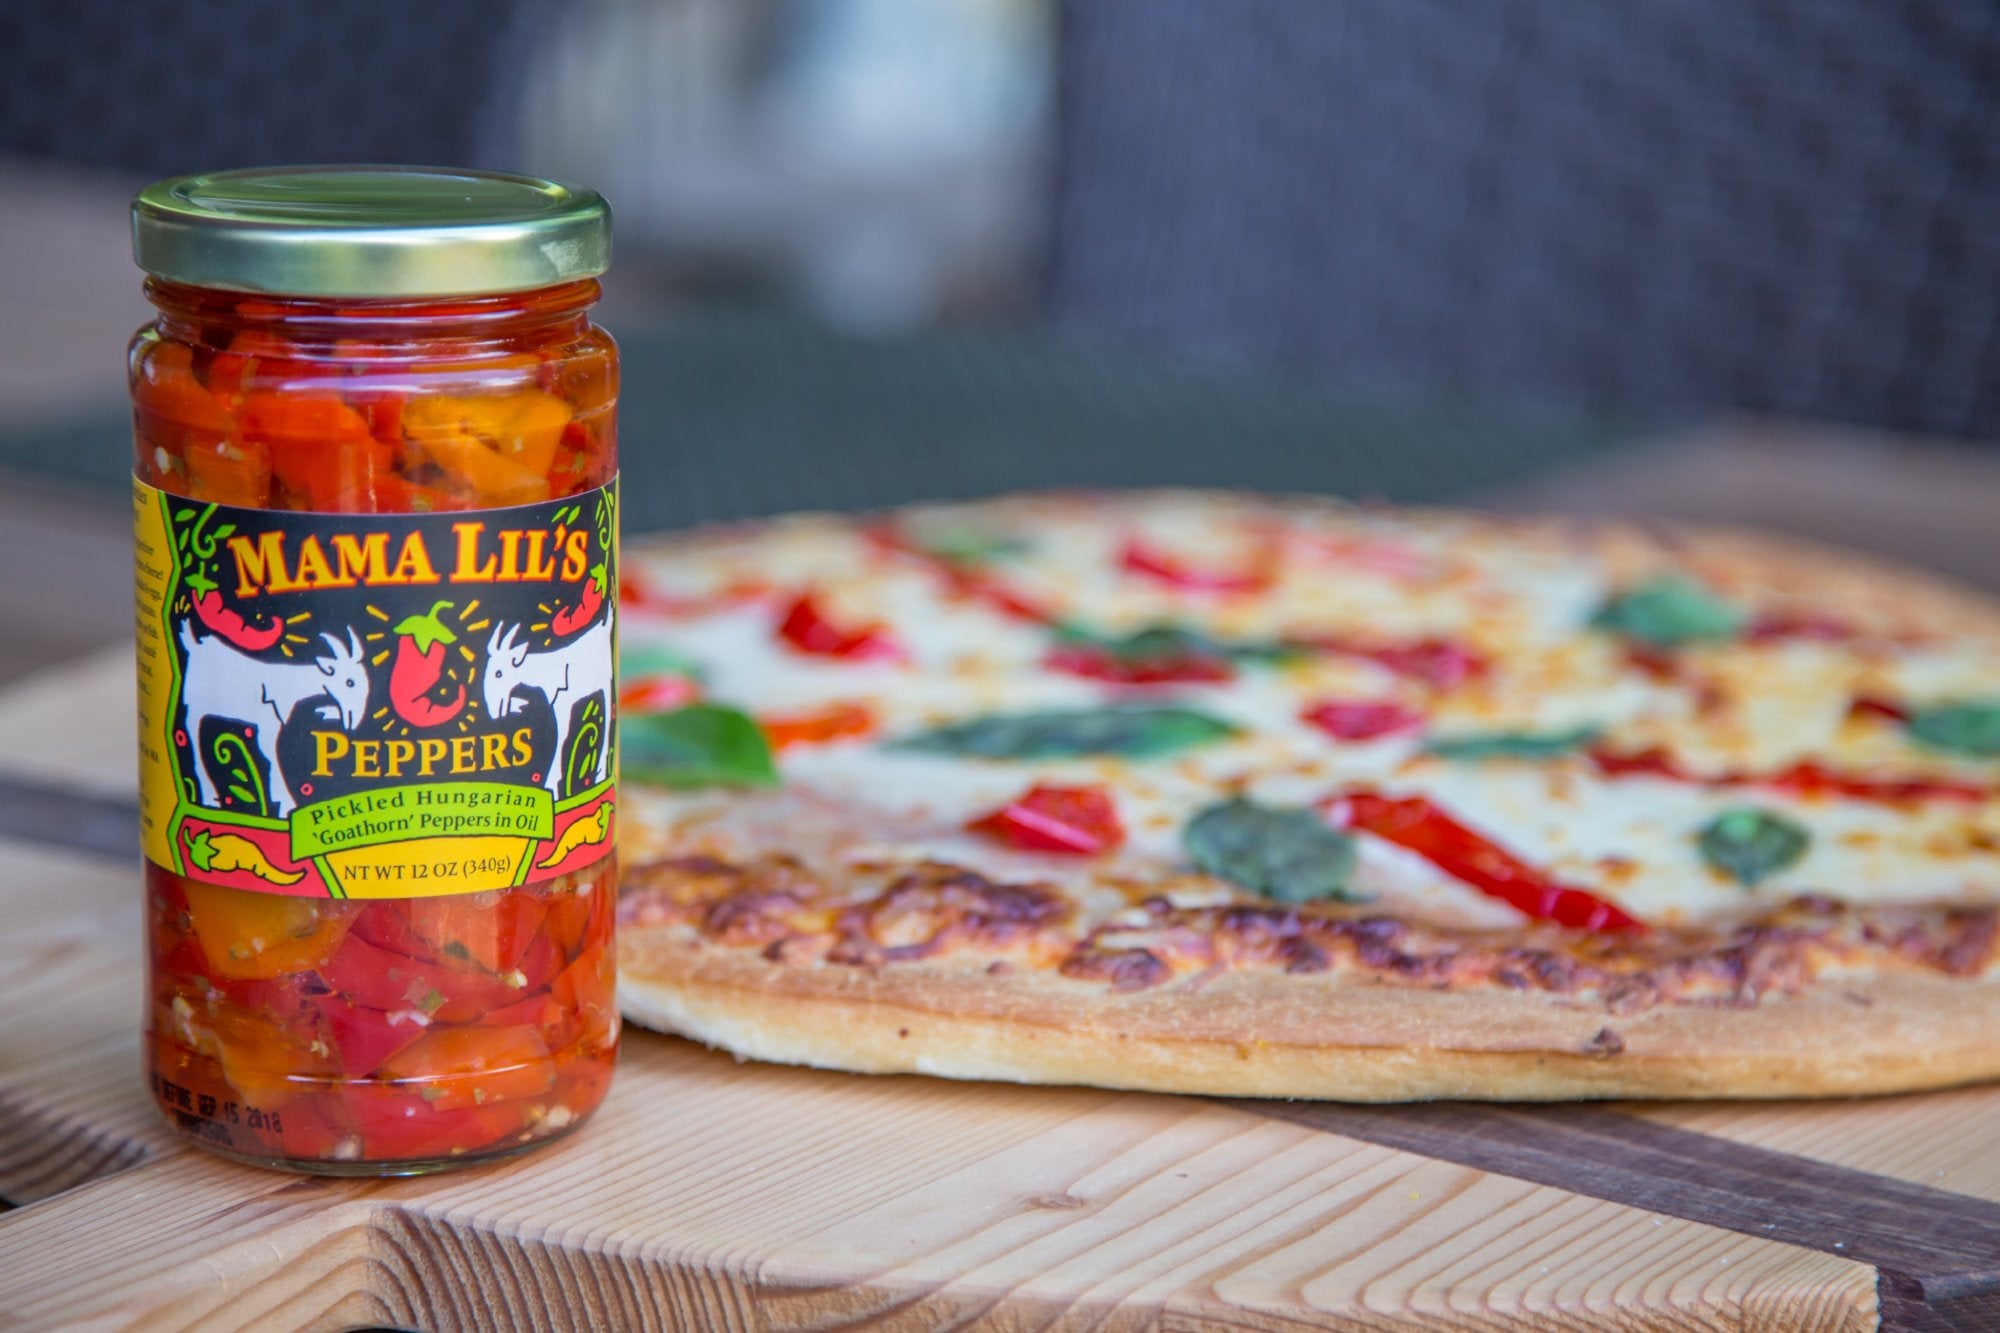 Mama Lil's Pickled Peppers and Fine Condiments  - Gourmet, Sweet, Hot and Mildly Spicy Pickled Peppers, Bread and Butter Pickle and Pepper Relish, Peppa Lilli Mustard, Pickled Asparagus and Green Beans For Sale Online.  Product of the USA